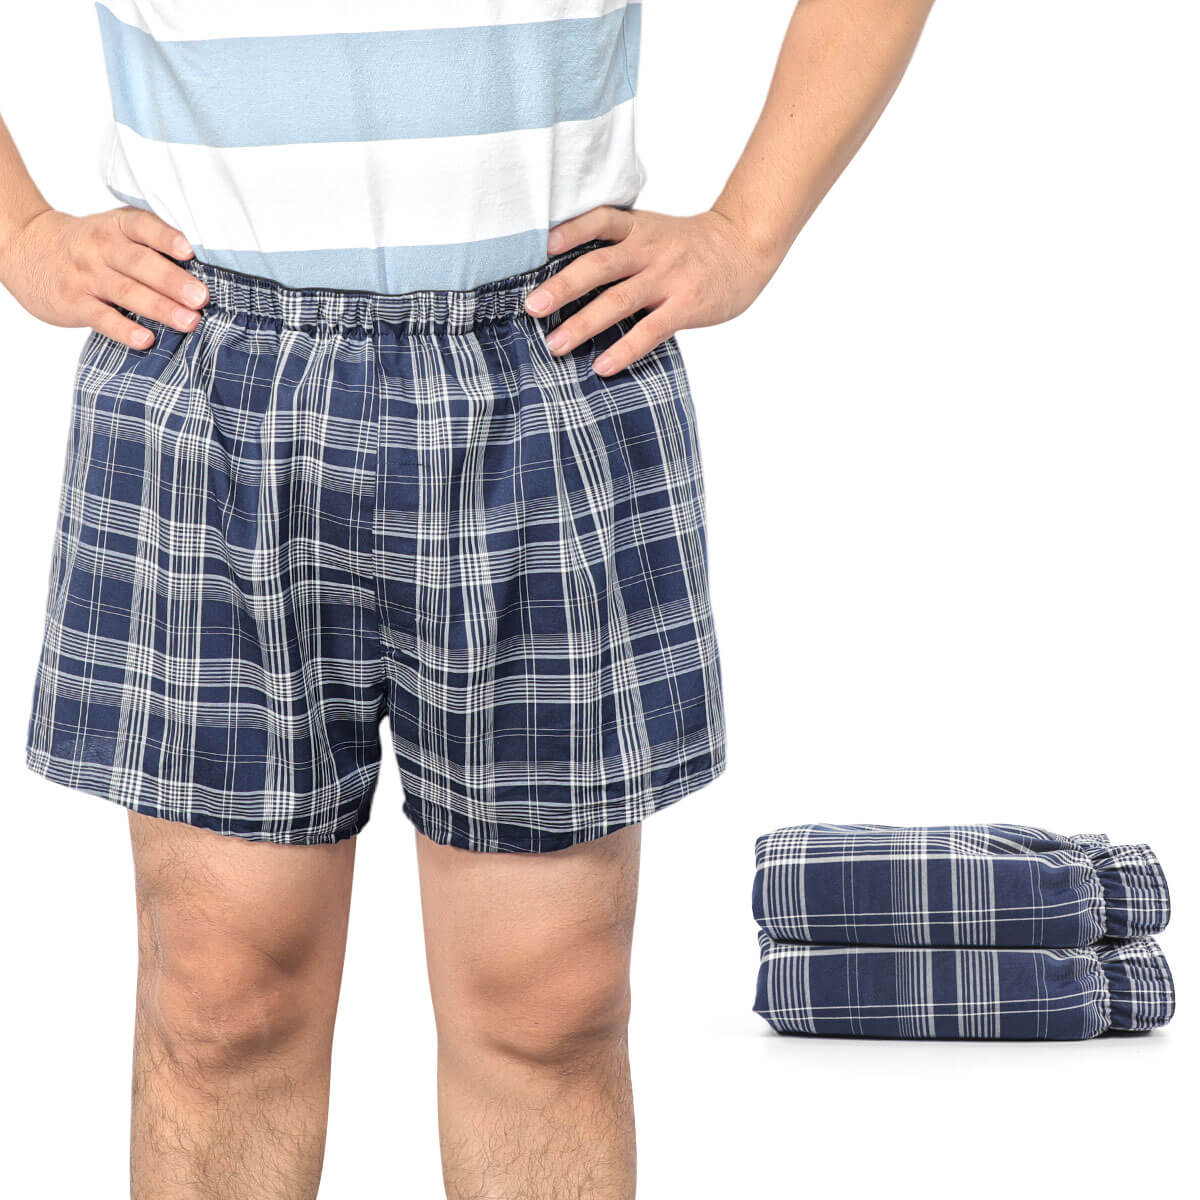 Incontinence Boxer Shorts Light Absorbency - M70